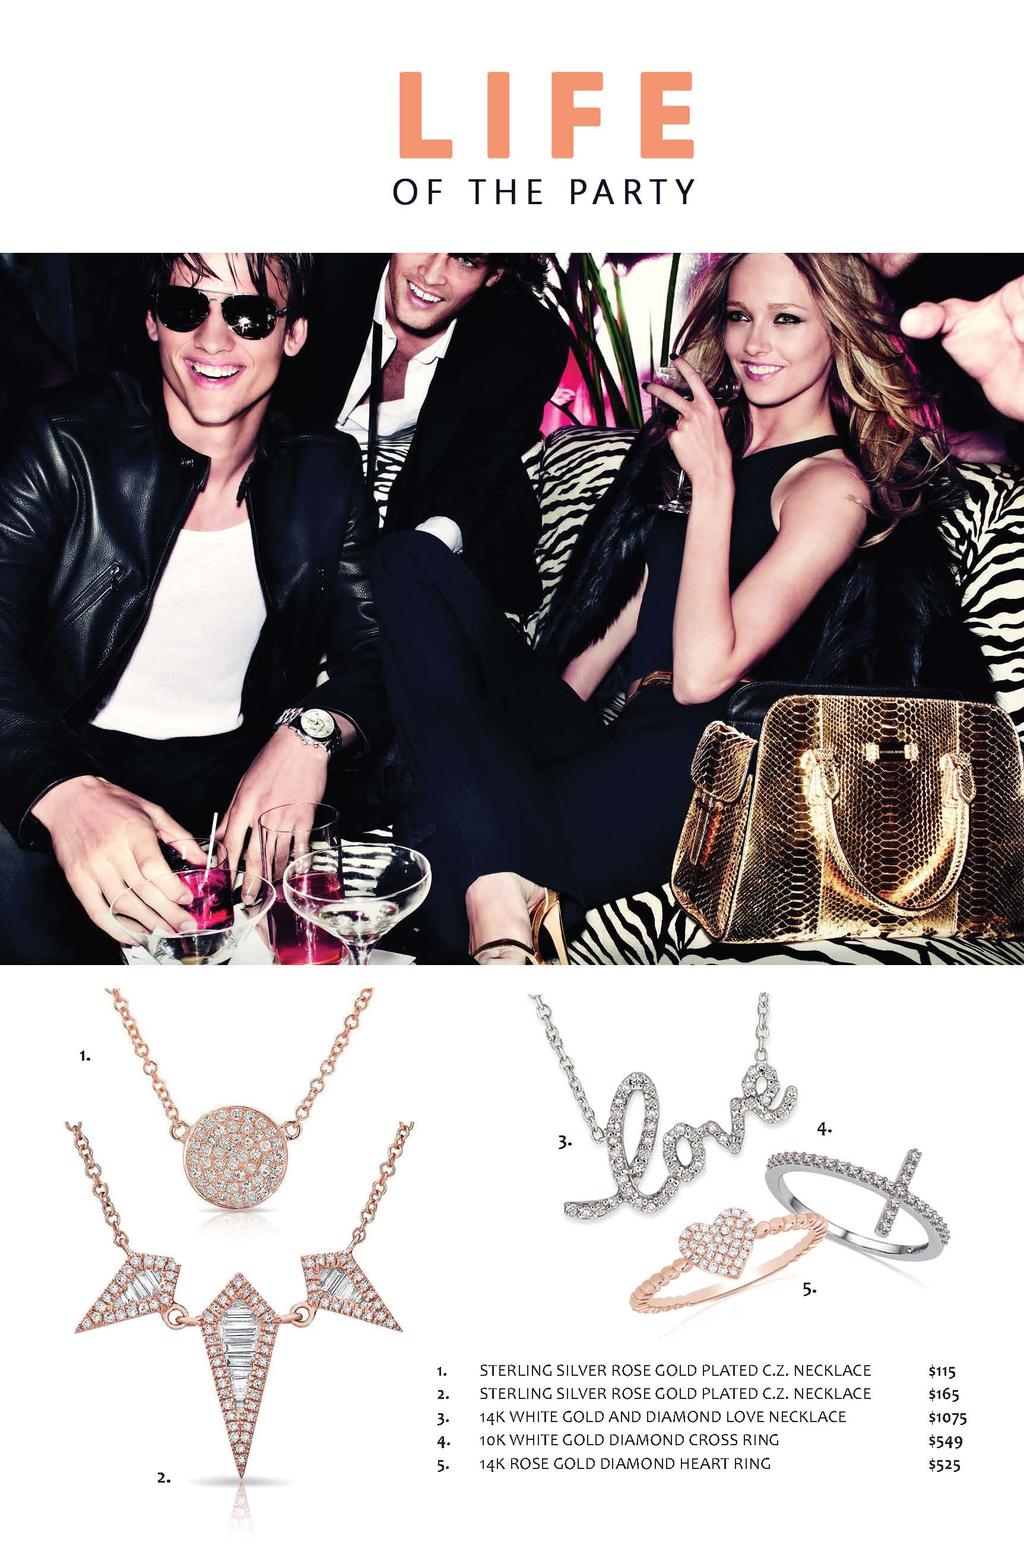 LIFE OF THE PARTY 1. 1. STERLING SILVER ROSE GOLD PLATED C.Z. NECKLACE $115 2. STERLING SILVER ROSE GOLD PLATED C.Z. NECKLACE $165 3.